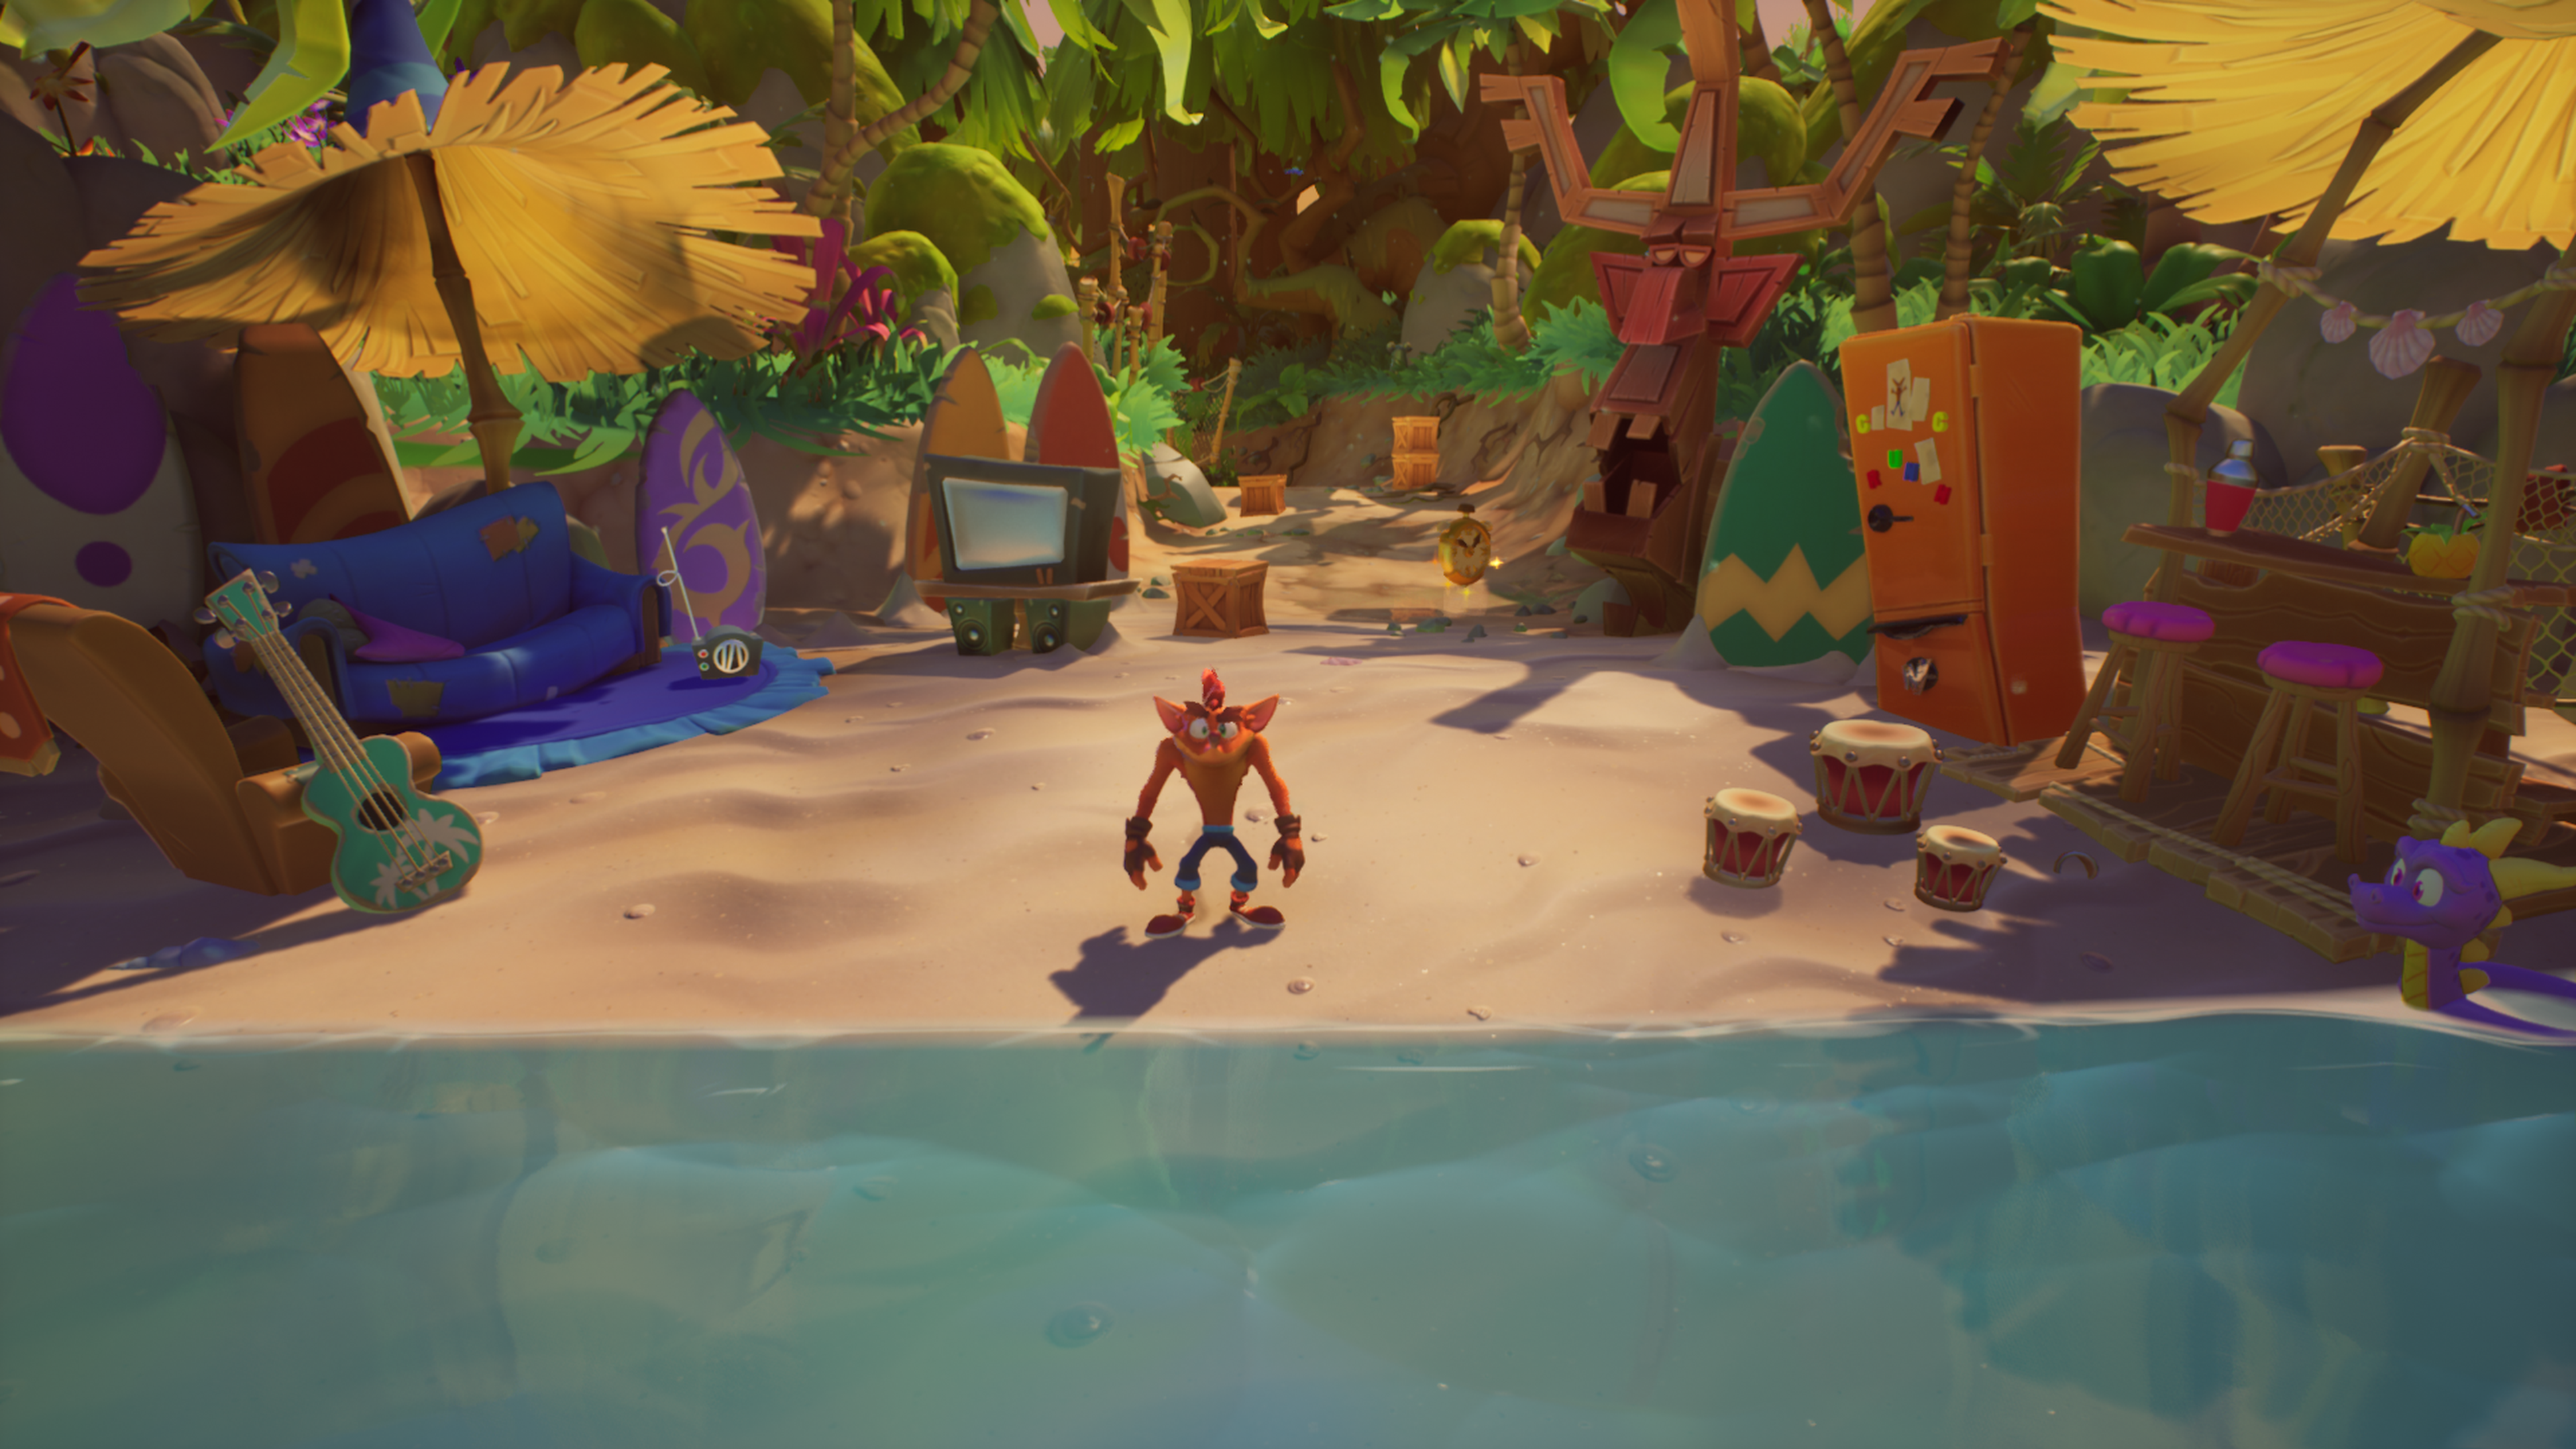 Crash Bandicoot 4 on PS5 is a must-play platformer